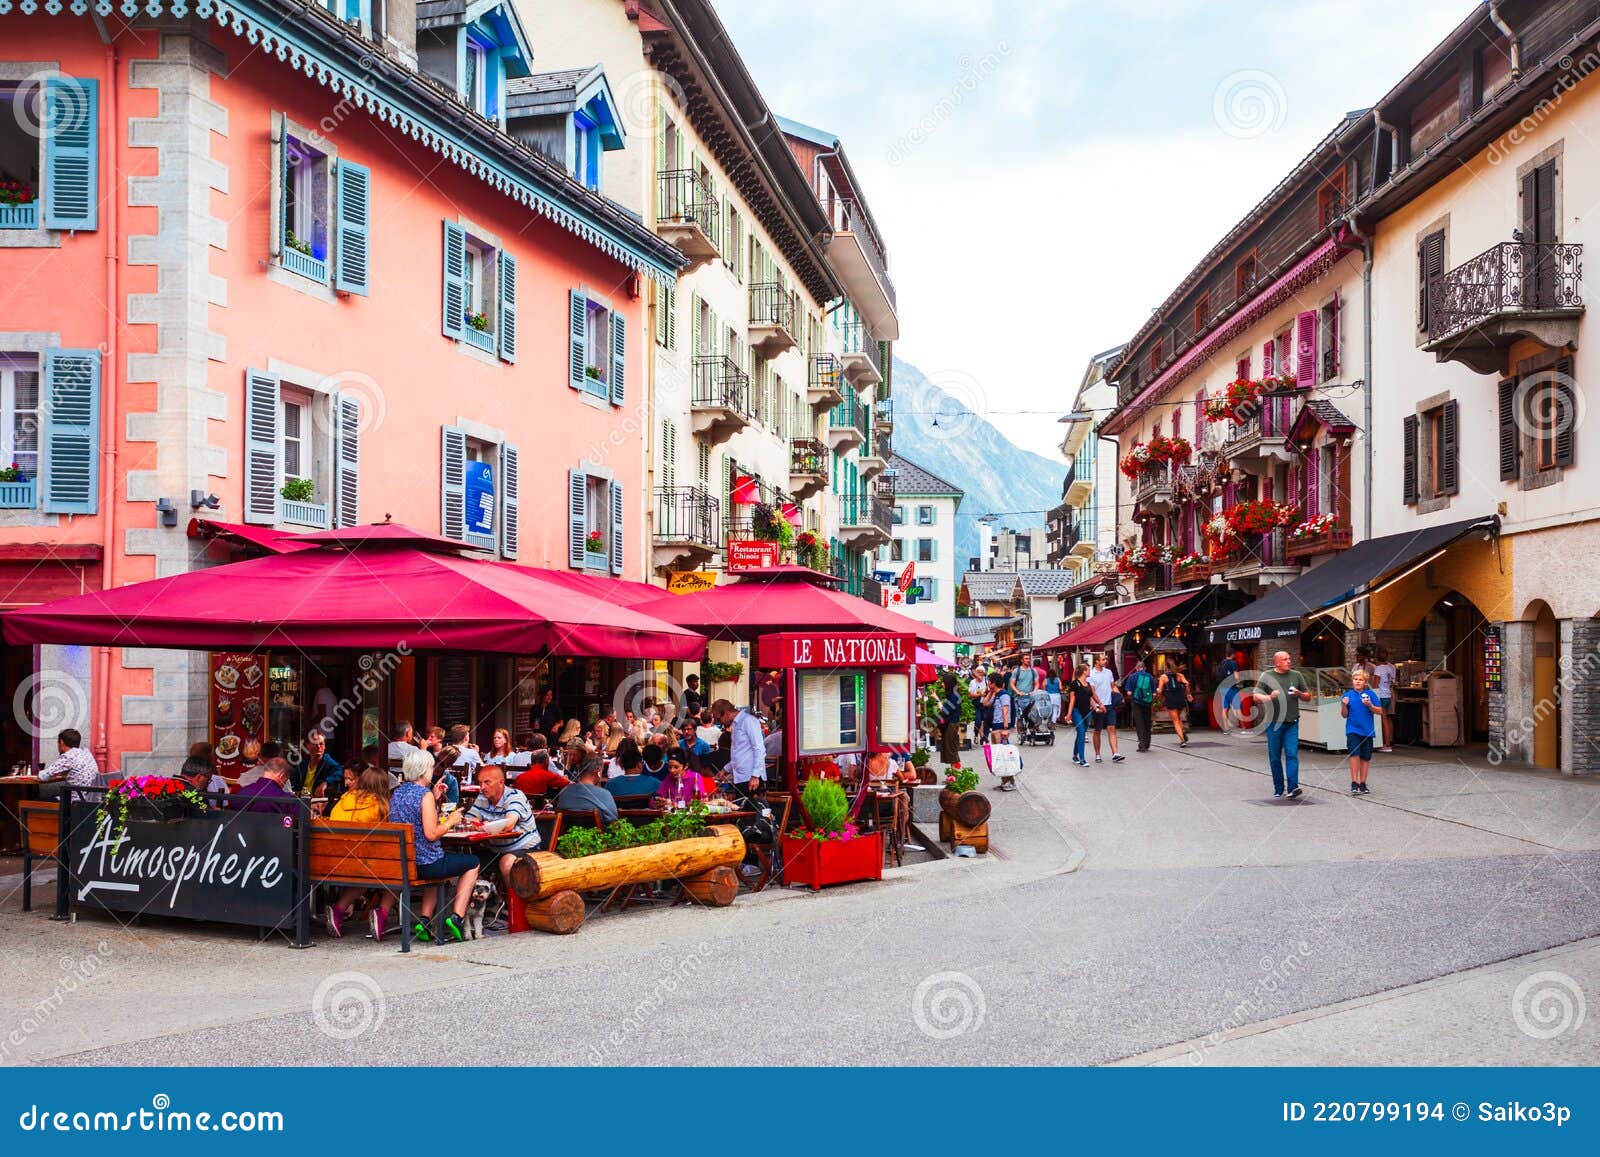 Chamonix Mont Blanc Town Stock Photos Free Royalty Free Stock Photos From Dreamstime